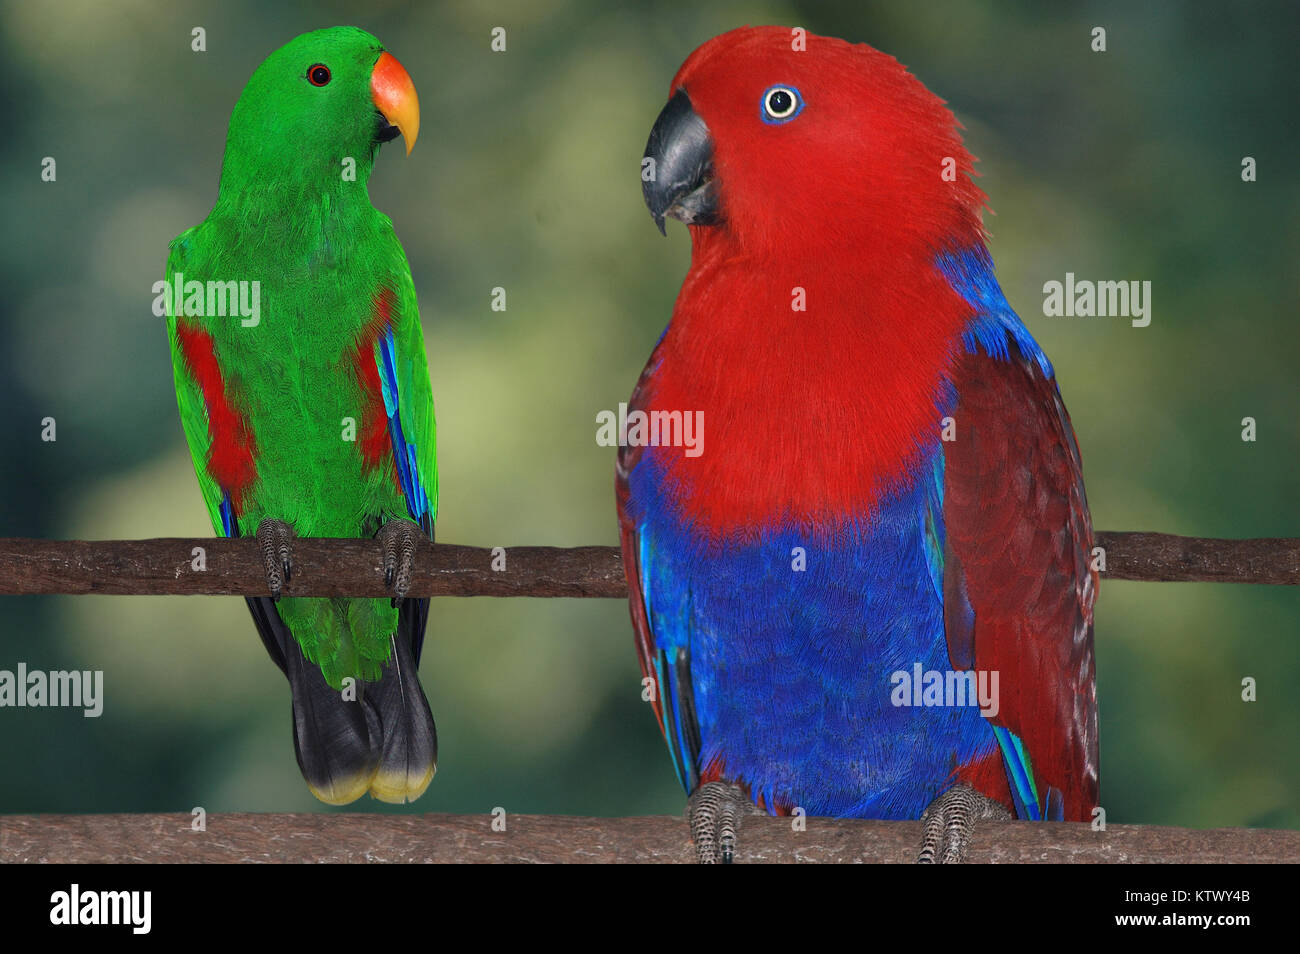 breeding pair of Australian red-sided parrots, Eclectus roratus Stock Photo